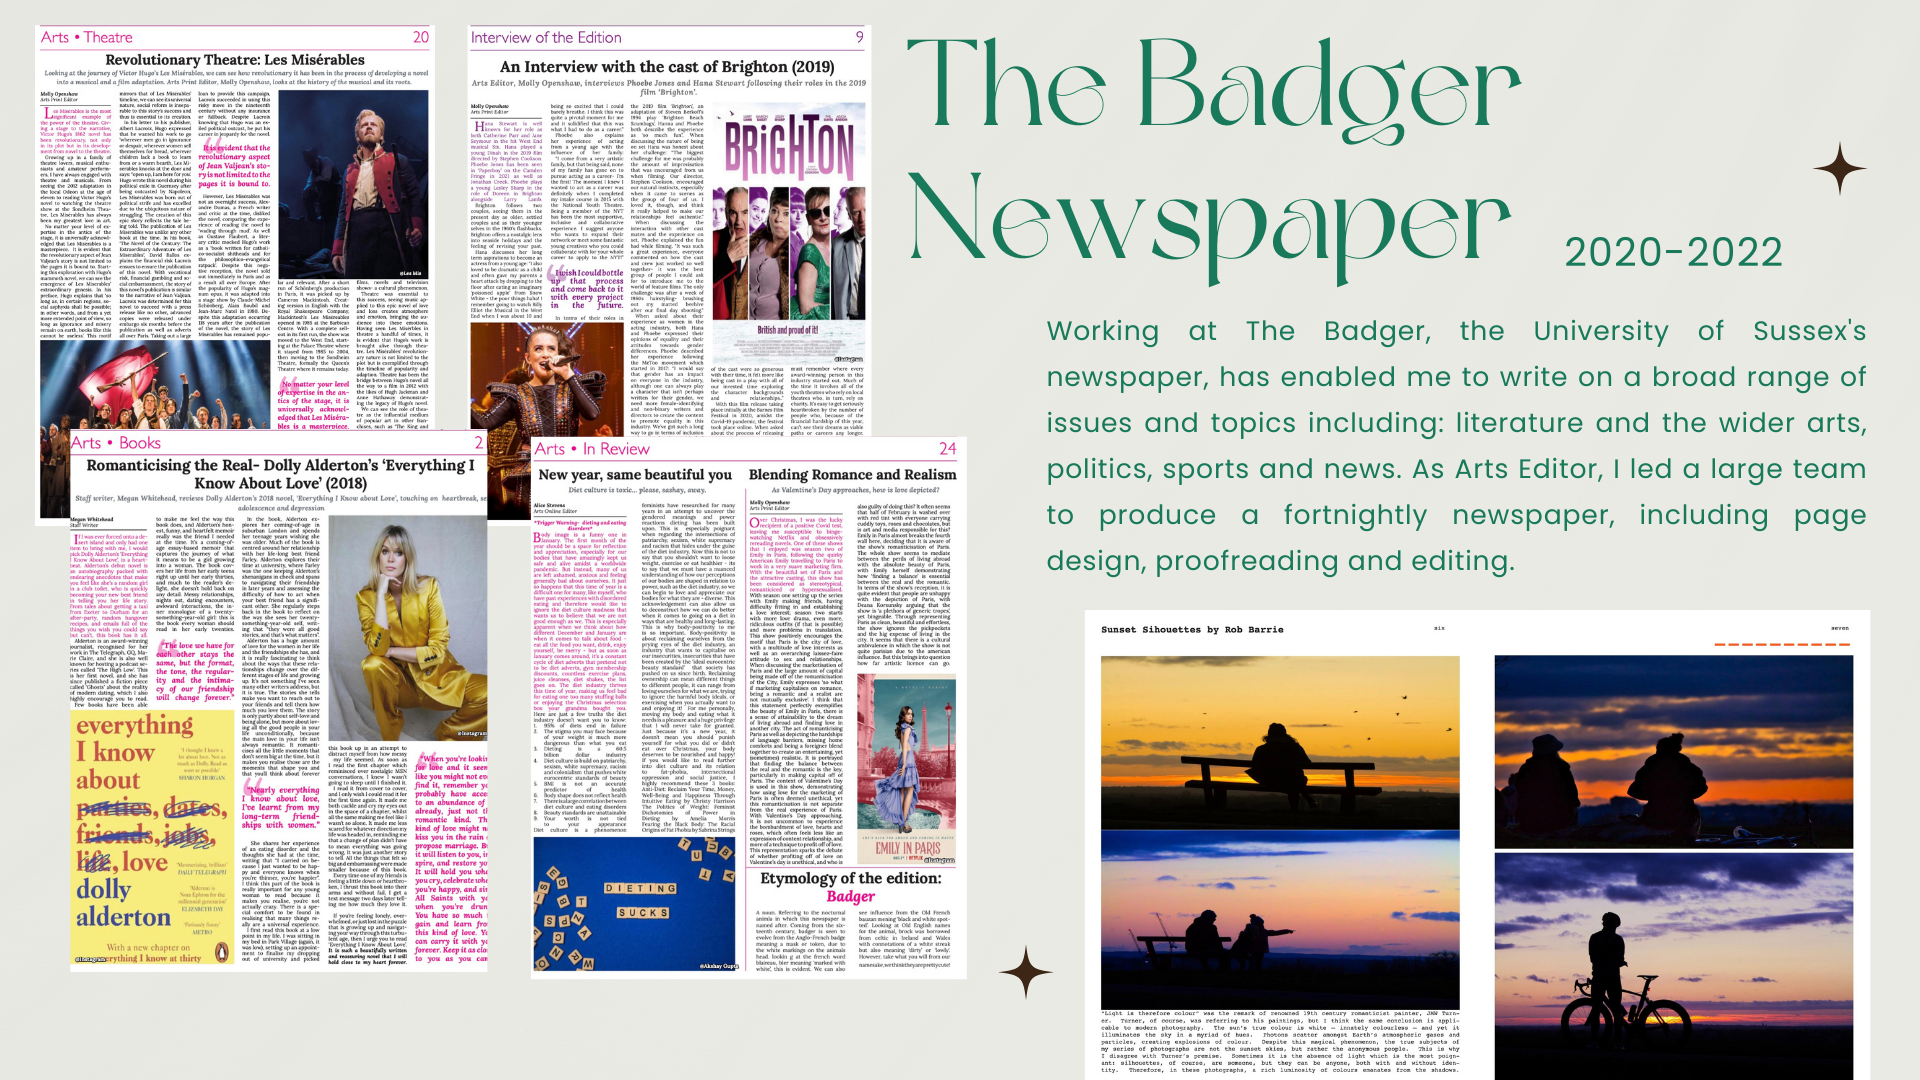 This is a portfolio of Molly's work, with examples of pages in The Badger Newspaper..